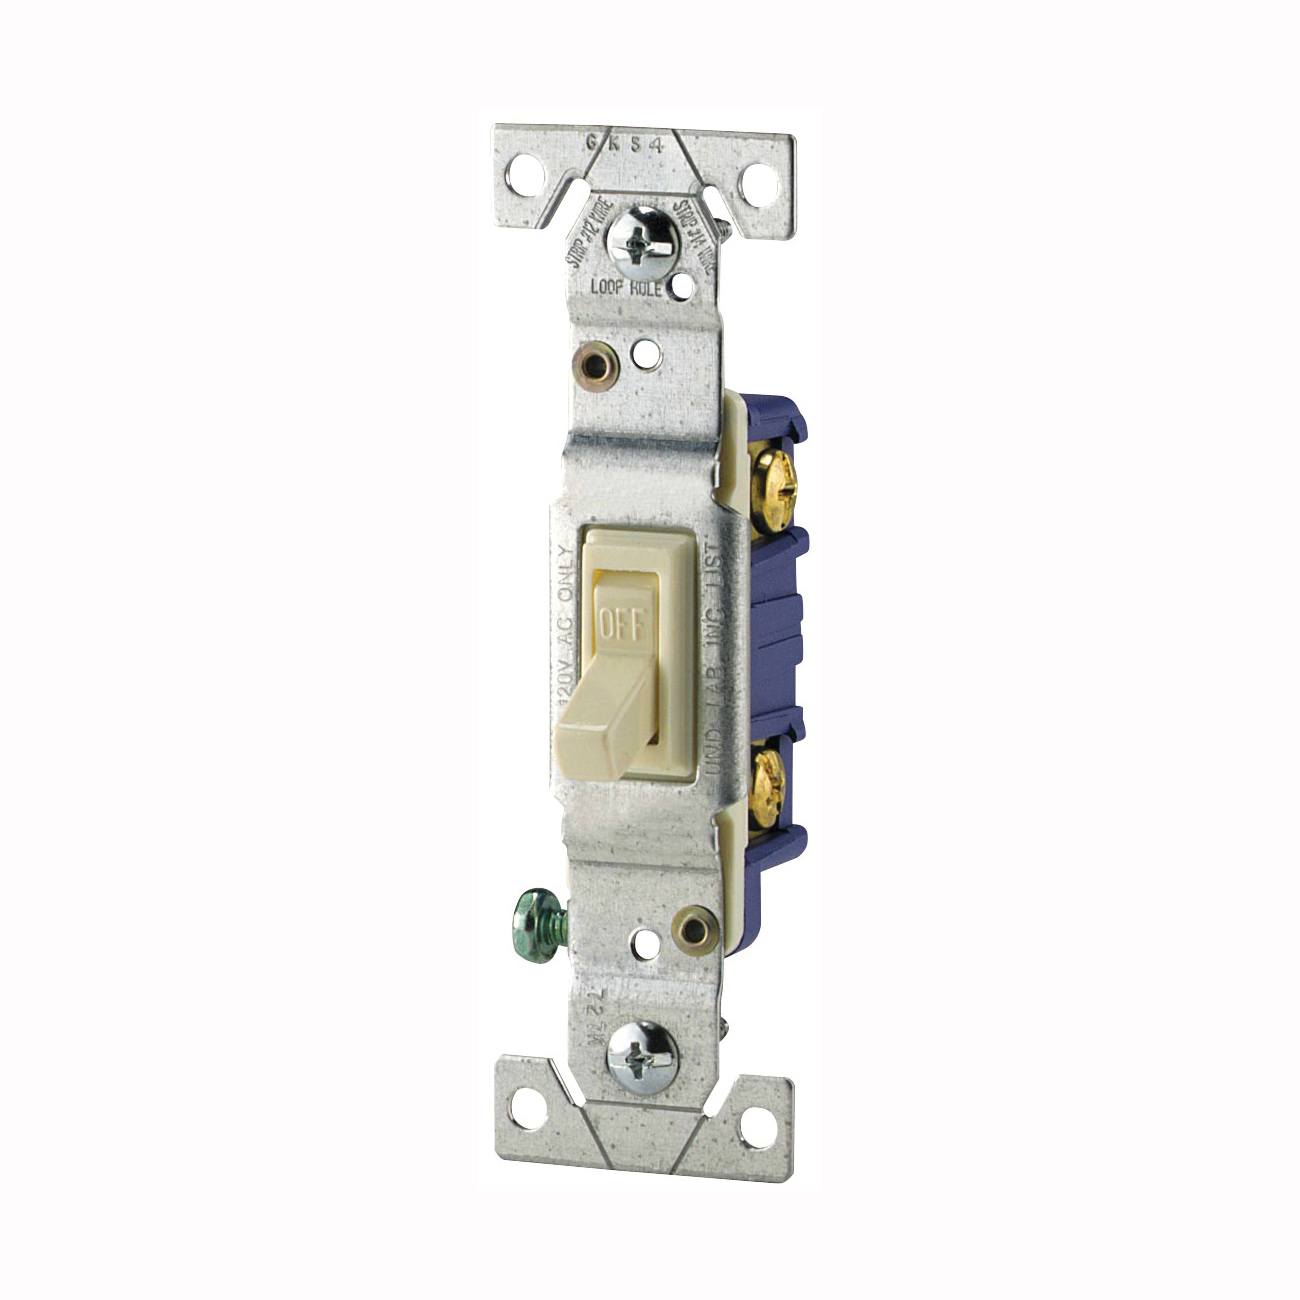 1301-7V Toggle Switch, 15 A, 120 V, Polycarbonate Housing Material, Ivory